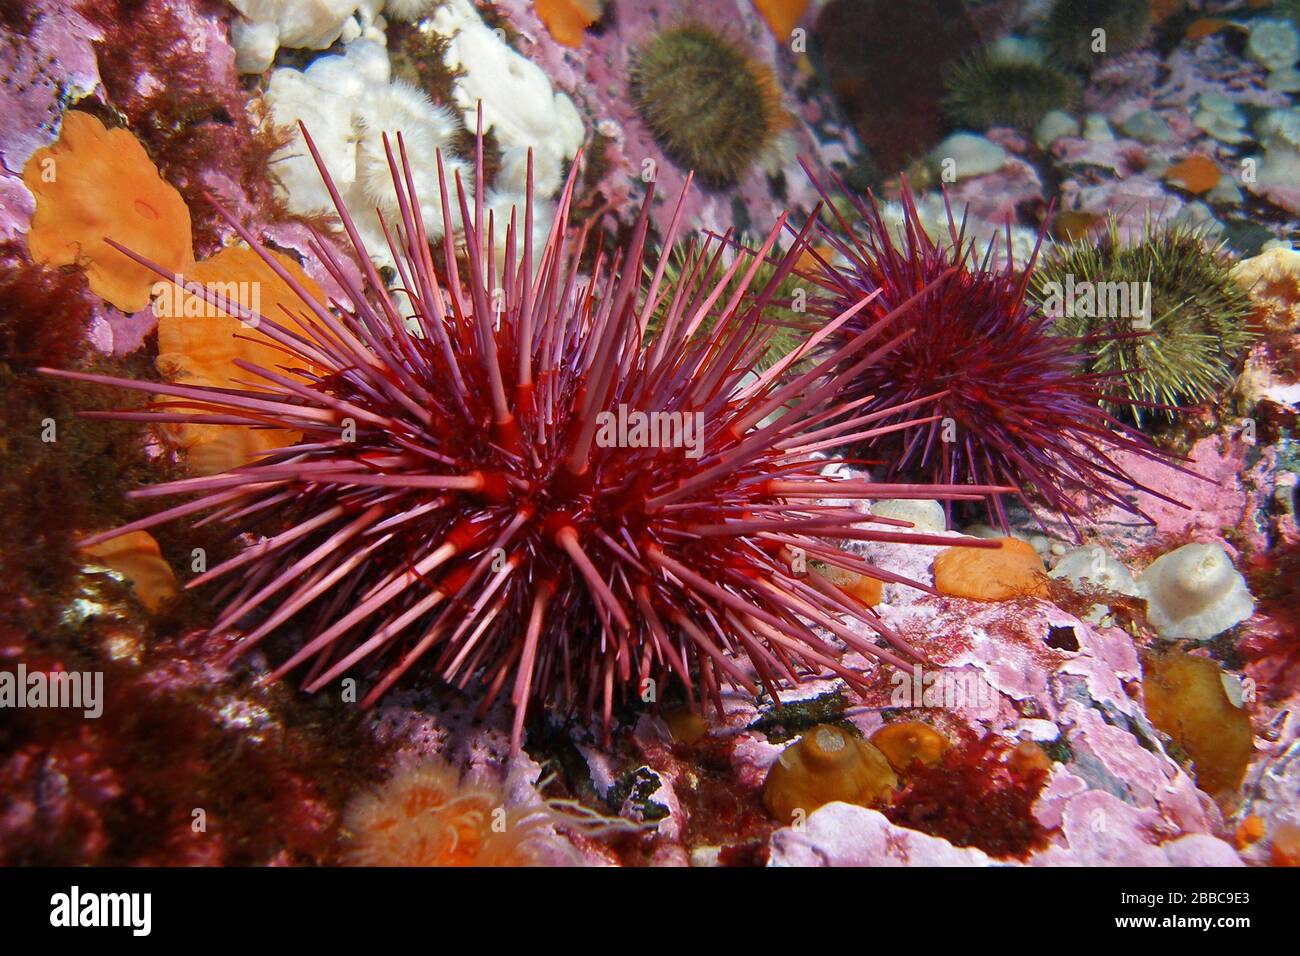 Giant red sea urchins (Strongylocentrotus franciscanus), Seymour Narrows, Campbell River area, BC Stock Photo